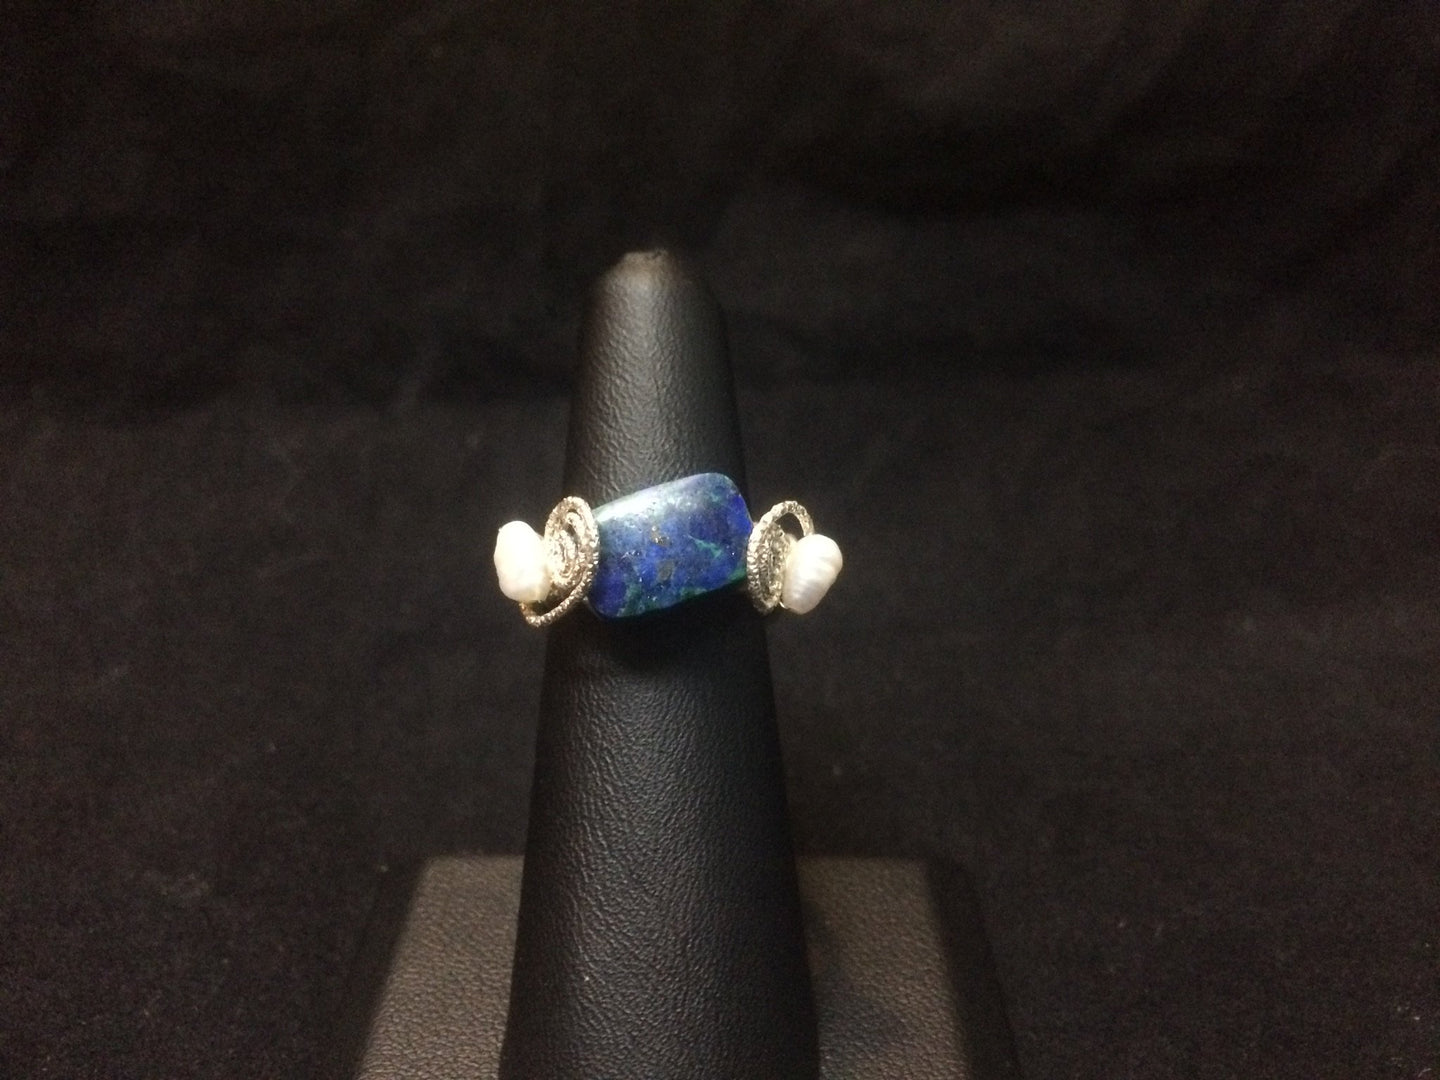 A 12x8mm natural chrysocolla bead is set with two textured swirls and two freshwater seed pearls as accents in this sterling silver wire wrapped ring. The wire wrapped rings made via this method vary individually. This one is approximately a size 6.5.